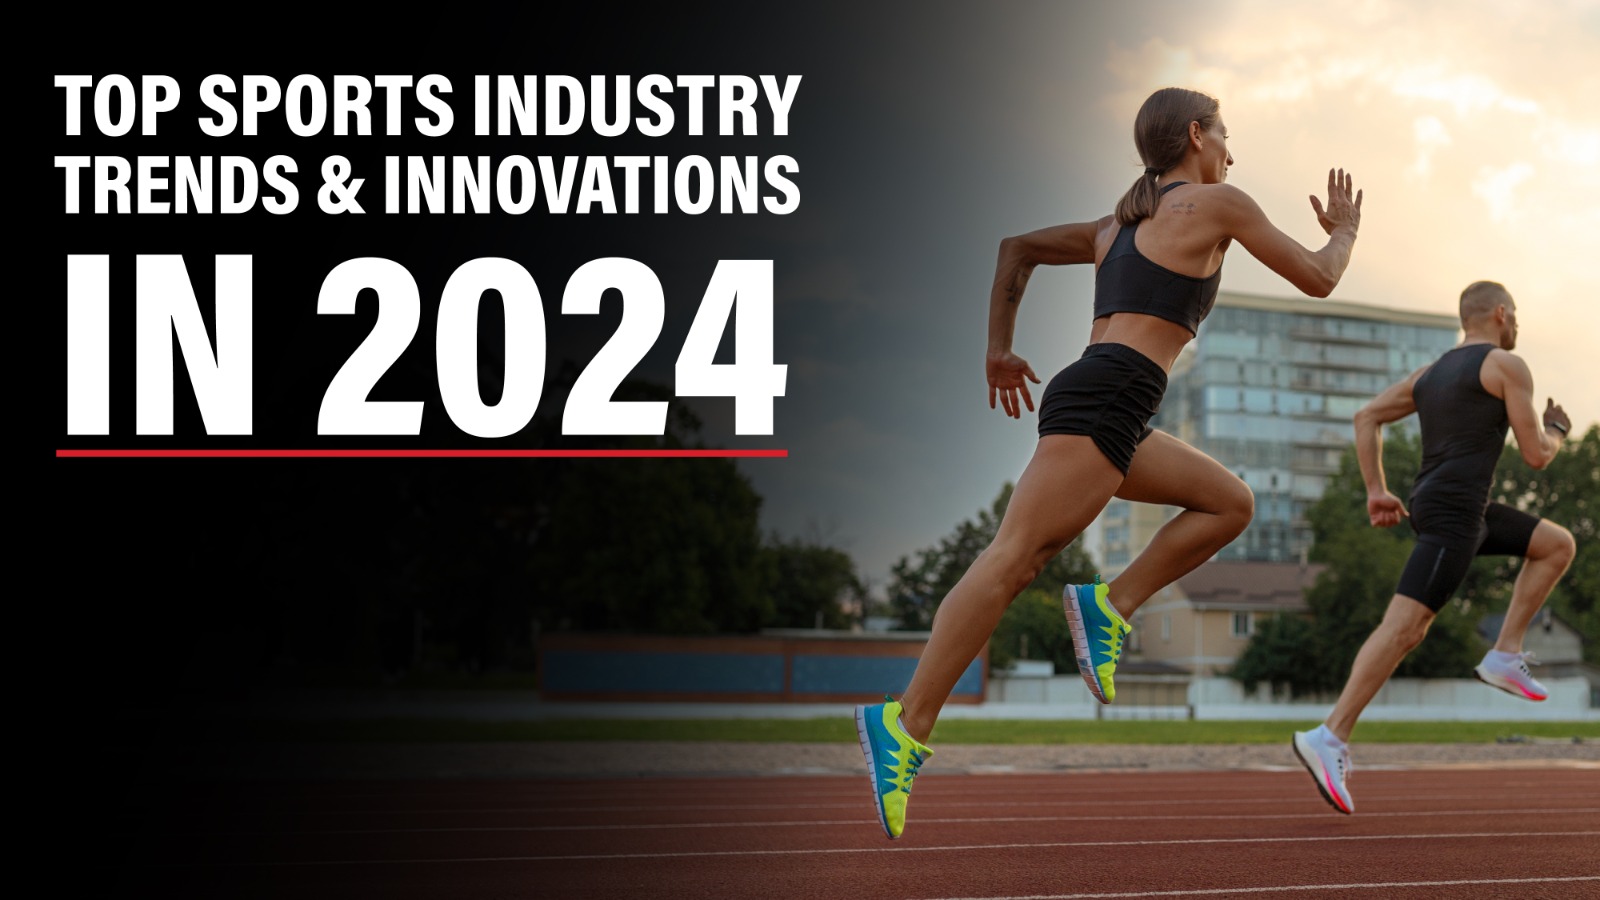 Top Sports Industry Trends & Innovations In 2024